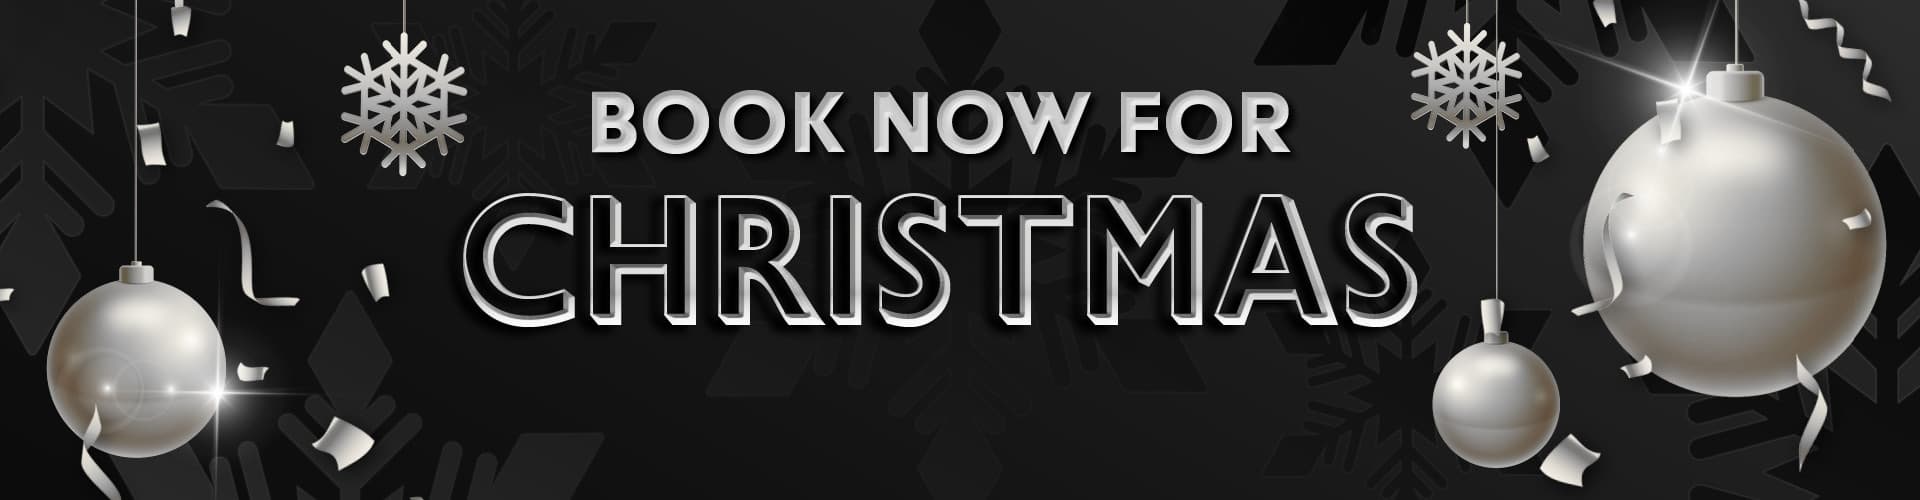 Book Now for Christmas at Embassy